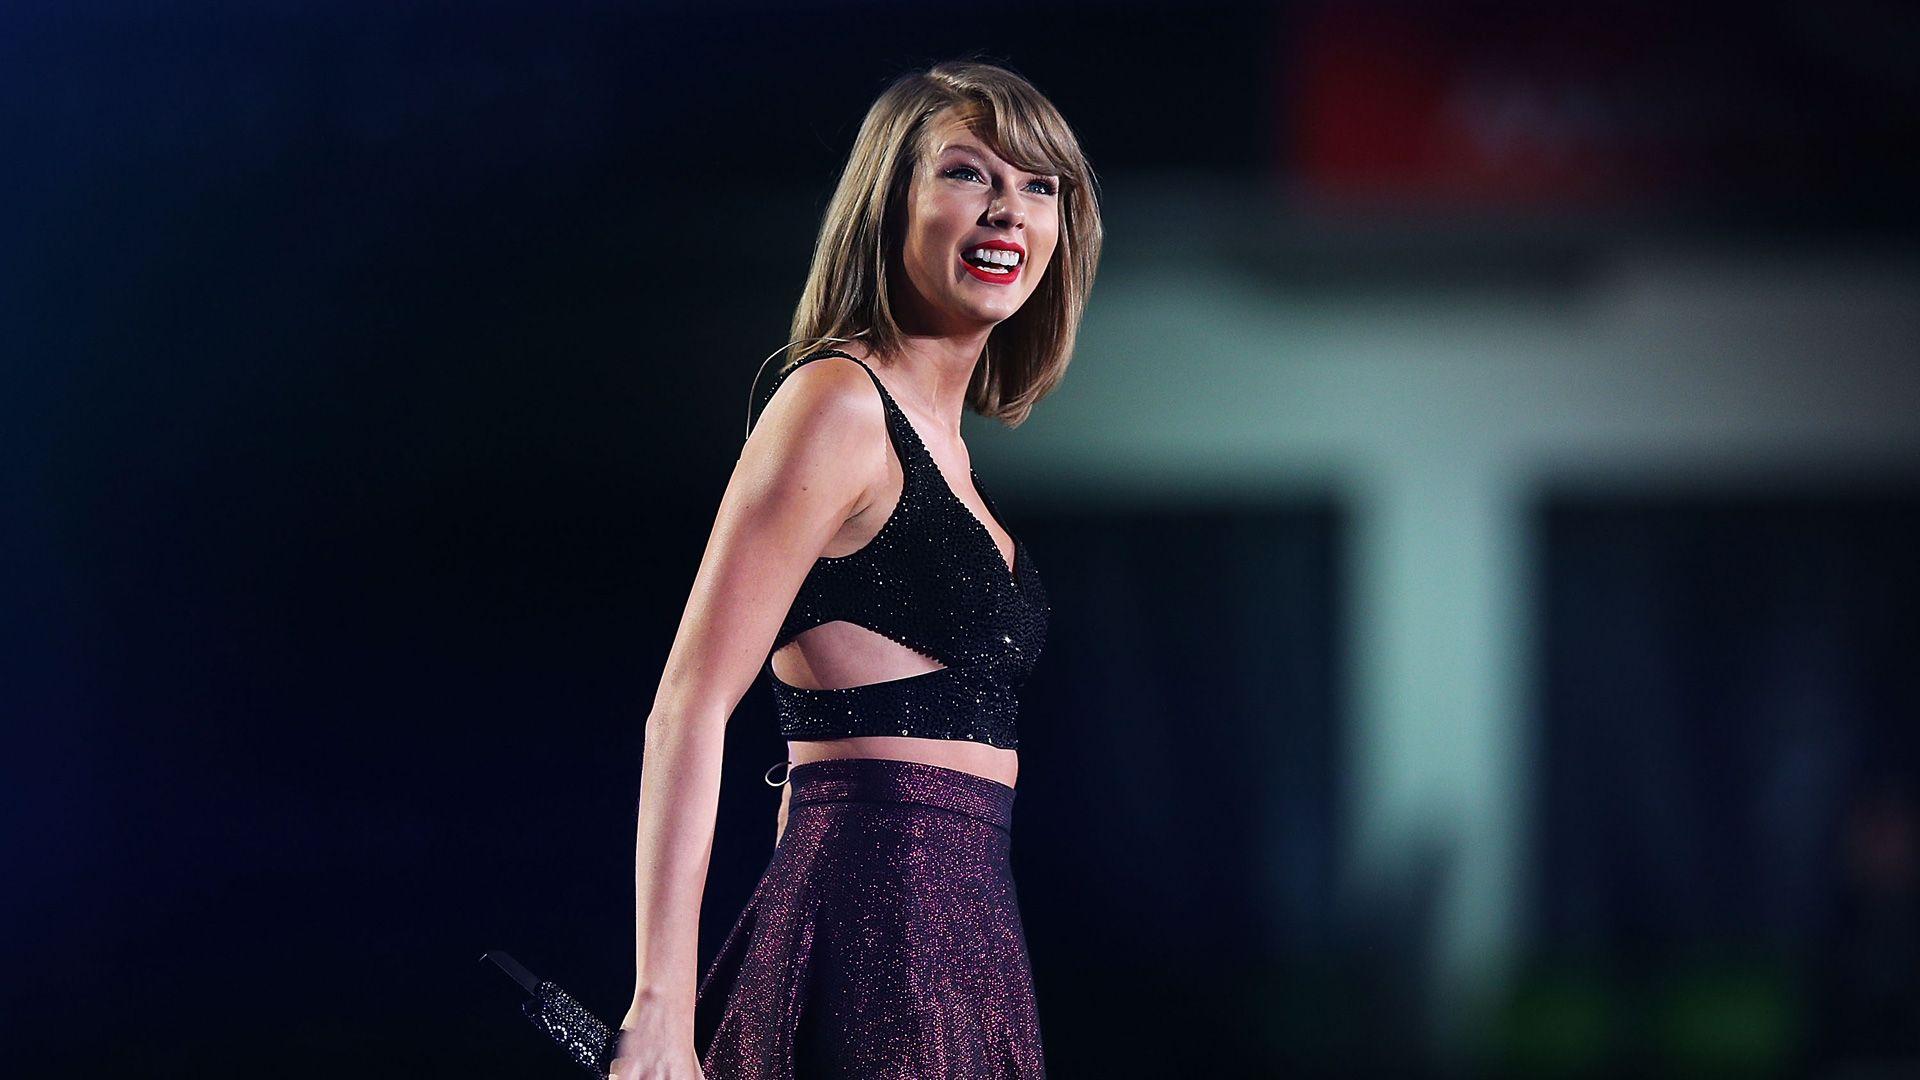 Ways Taylor Swift's 1989 changed the world